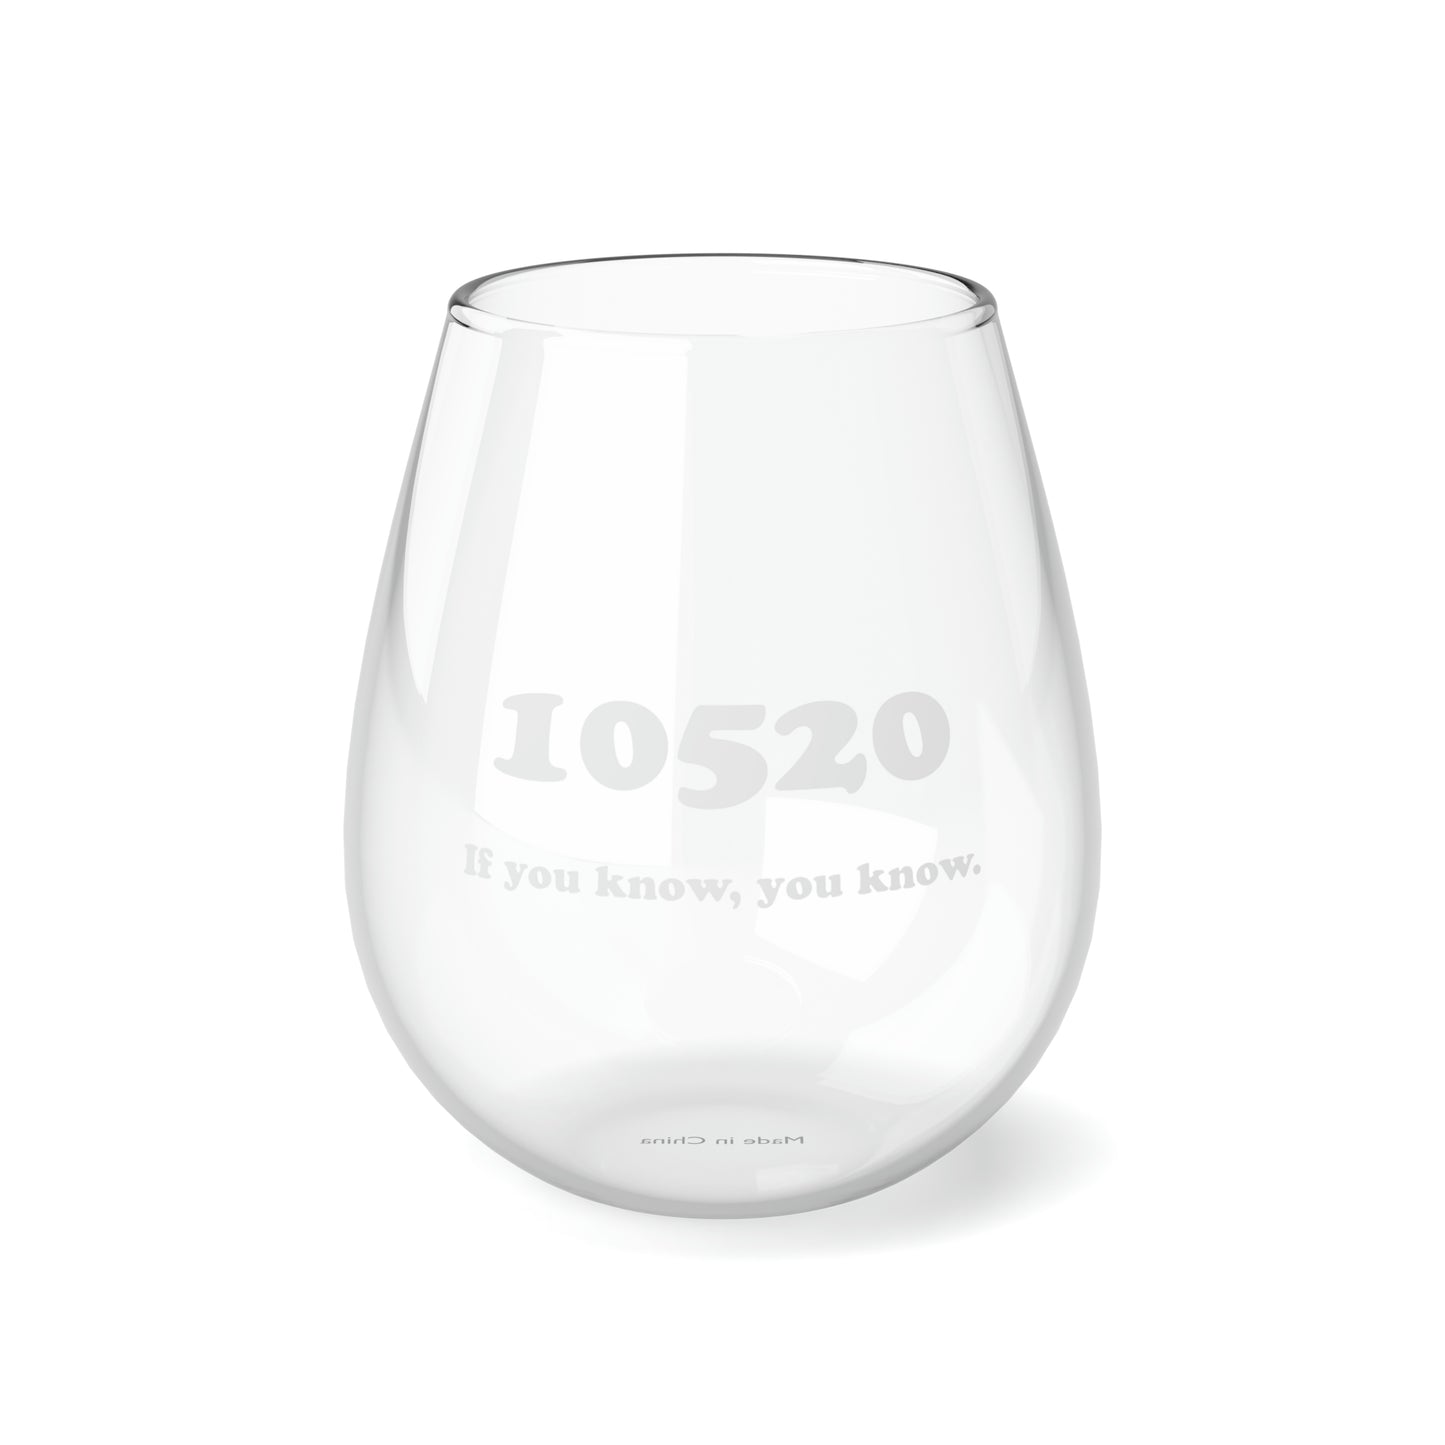 10520 If you know, you know Glass (white)